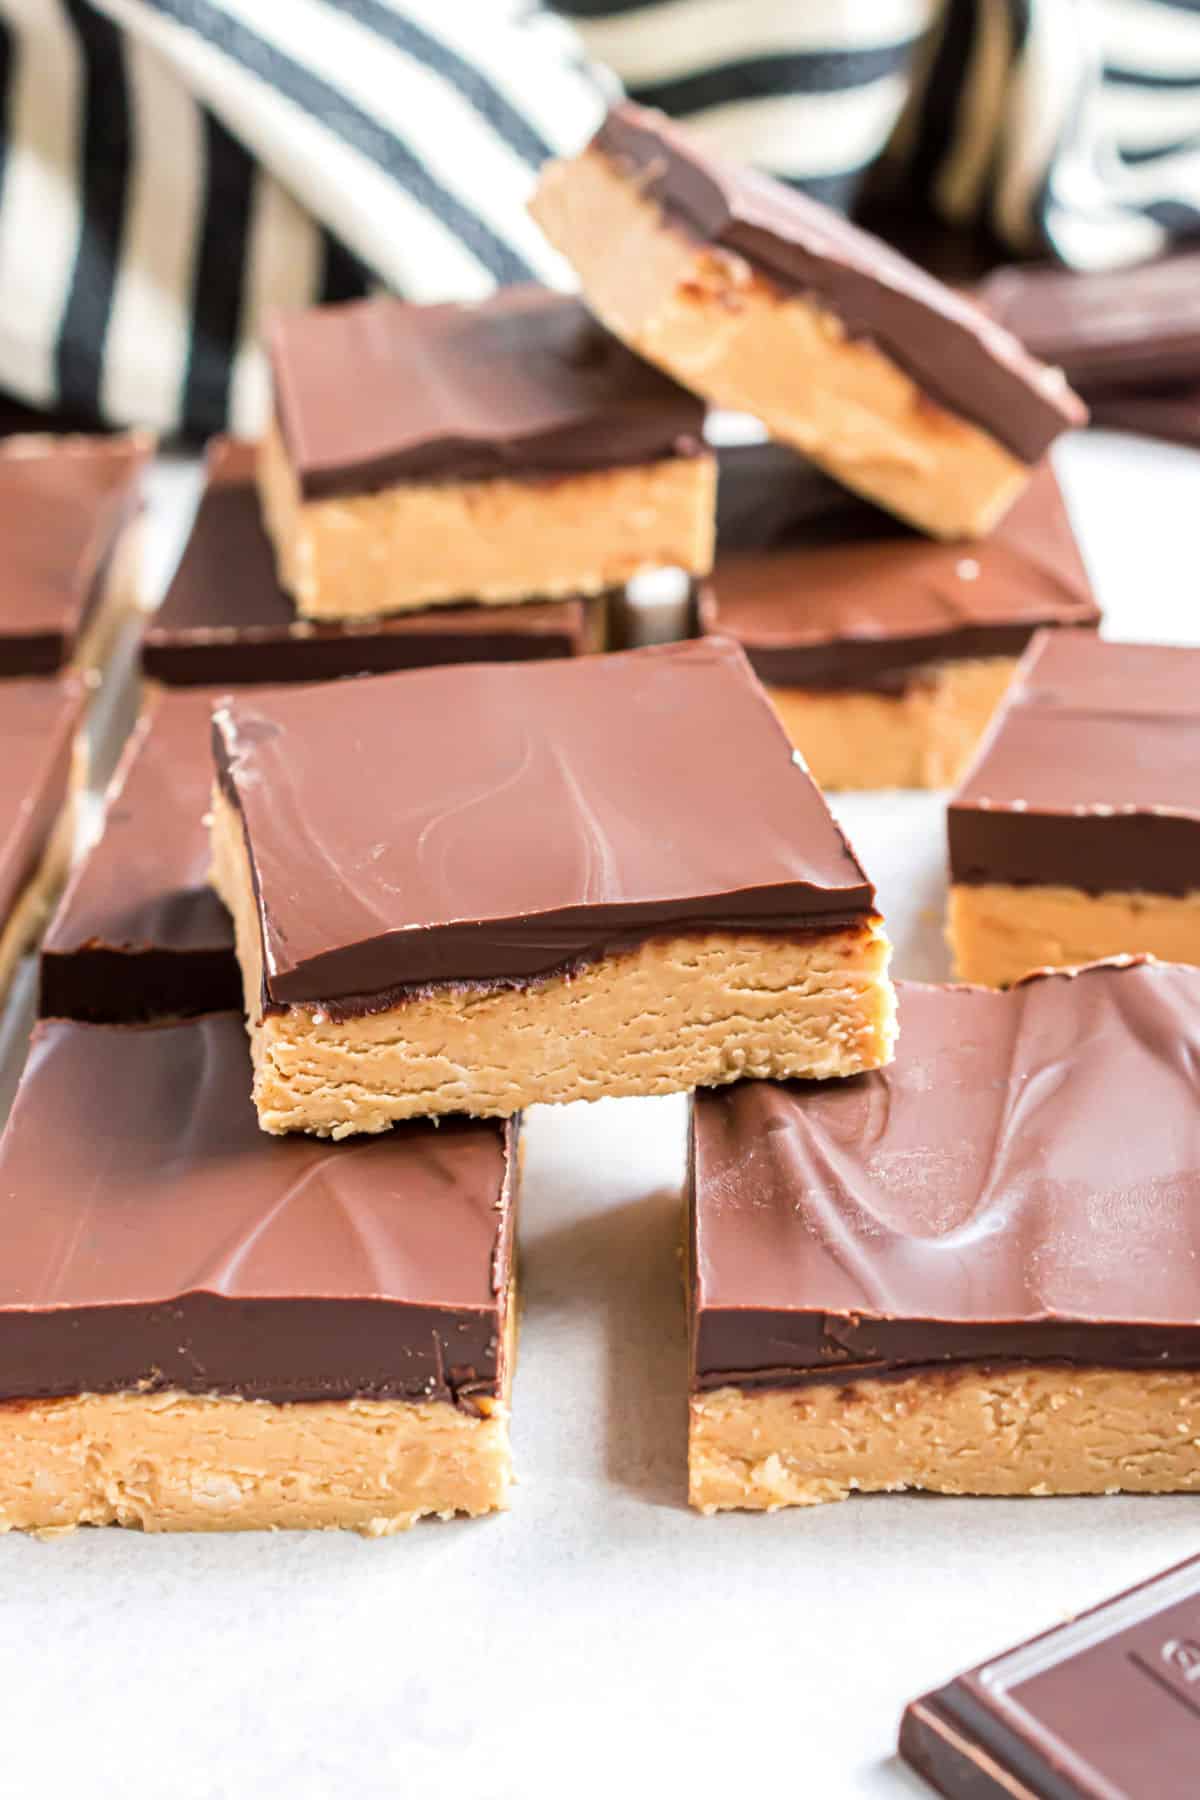 Peanut butter bars stacked on a white plate.